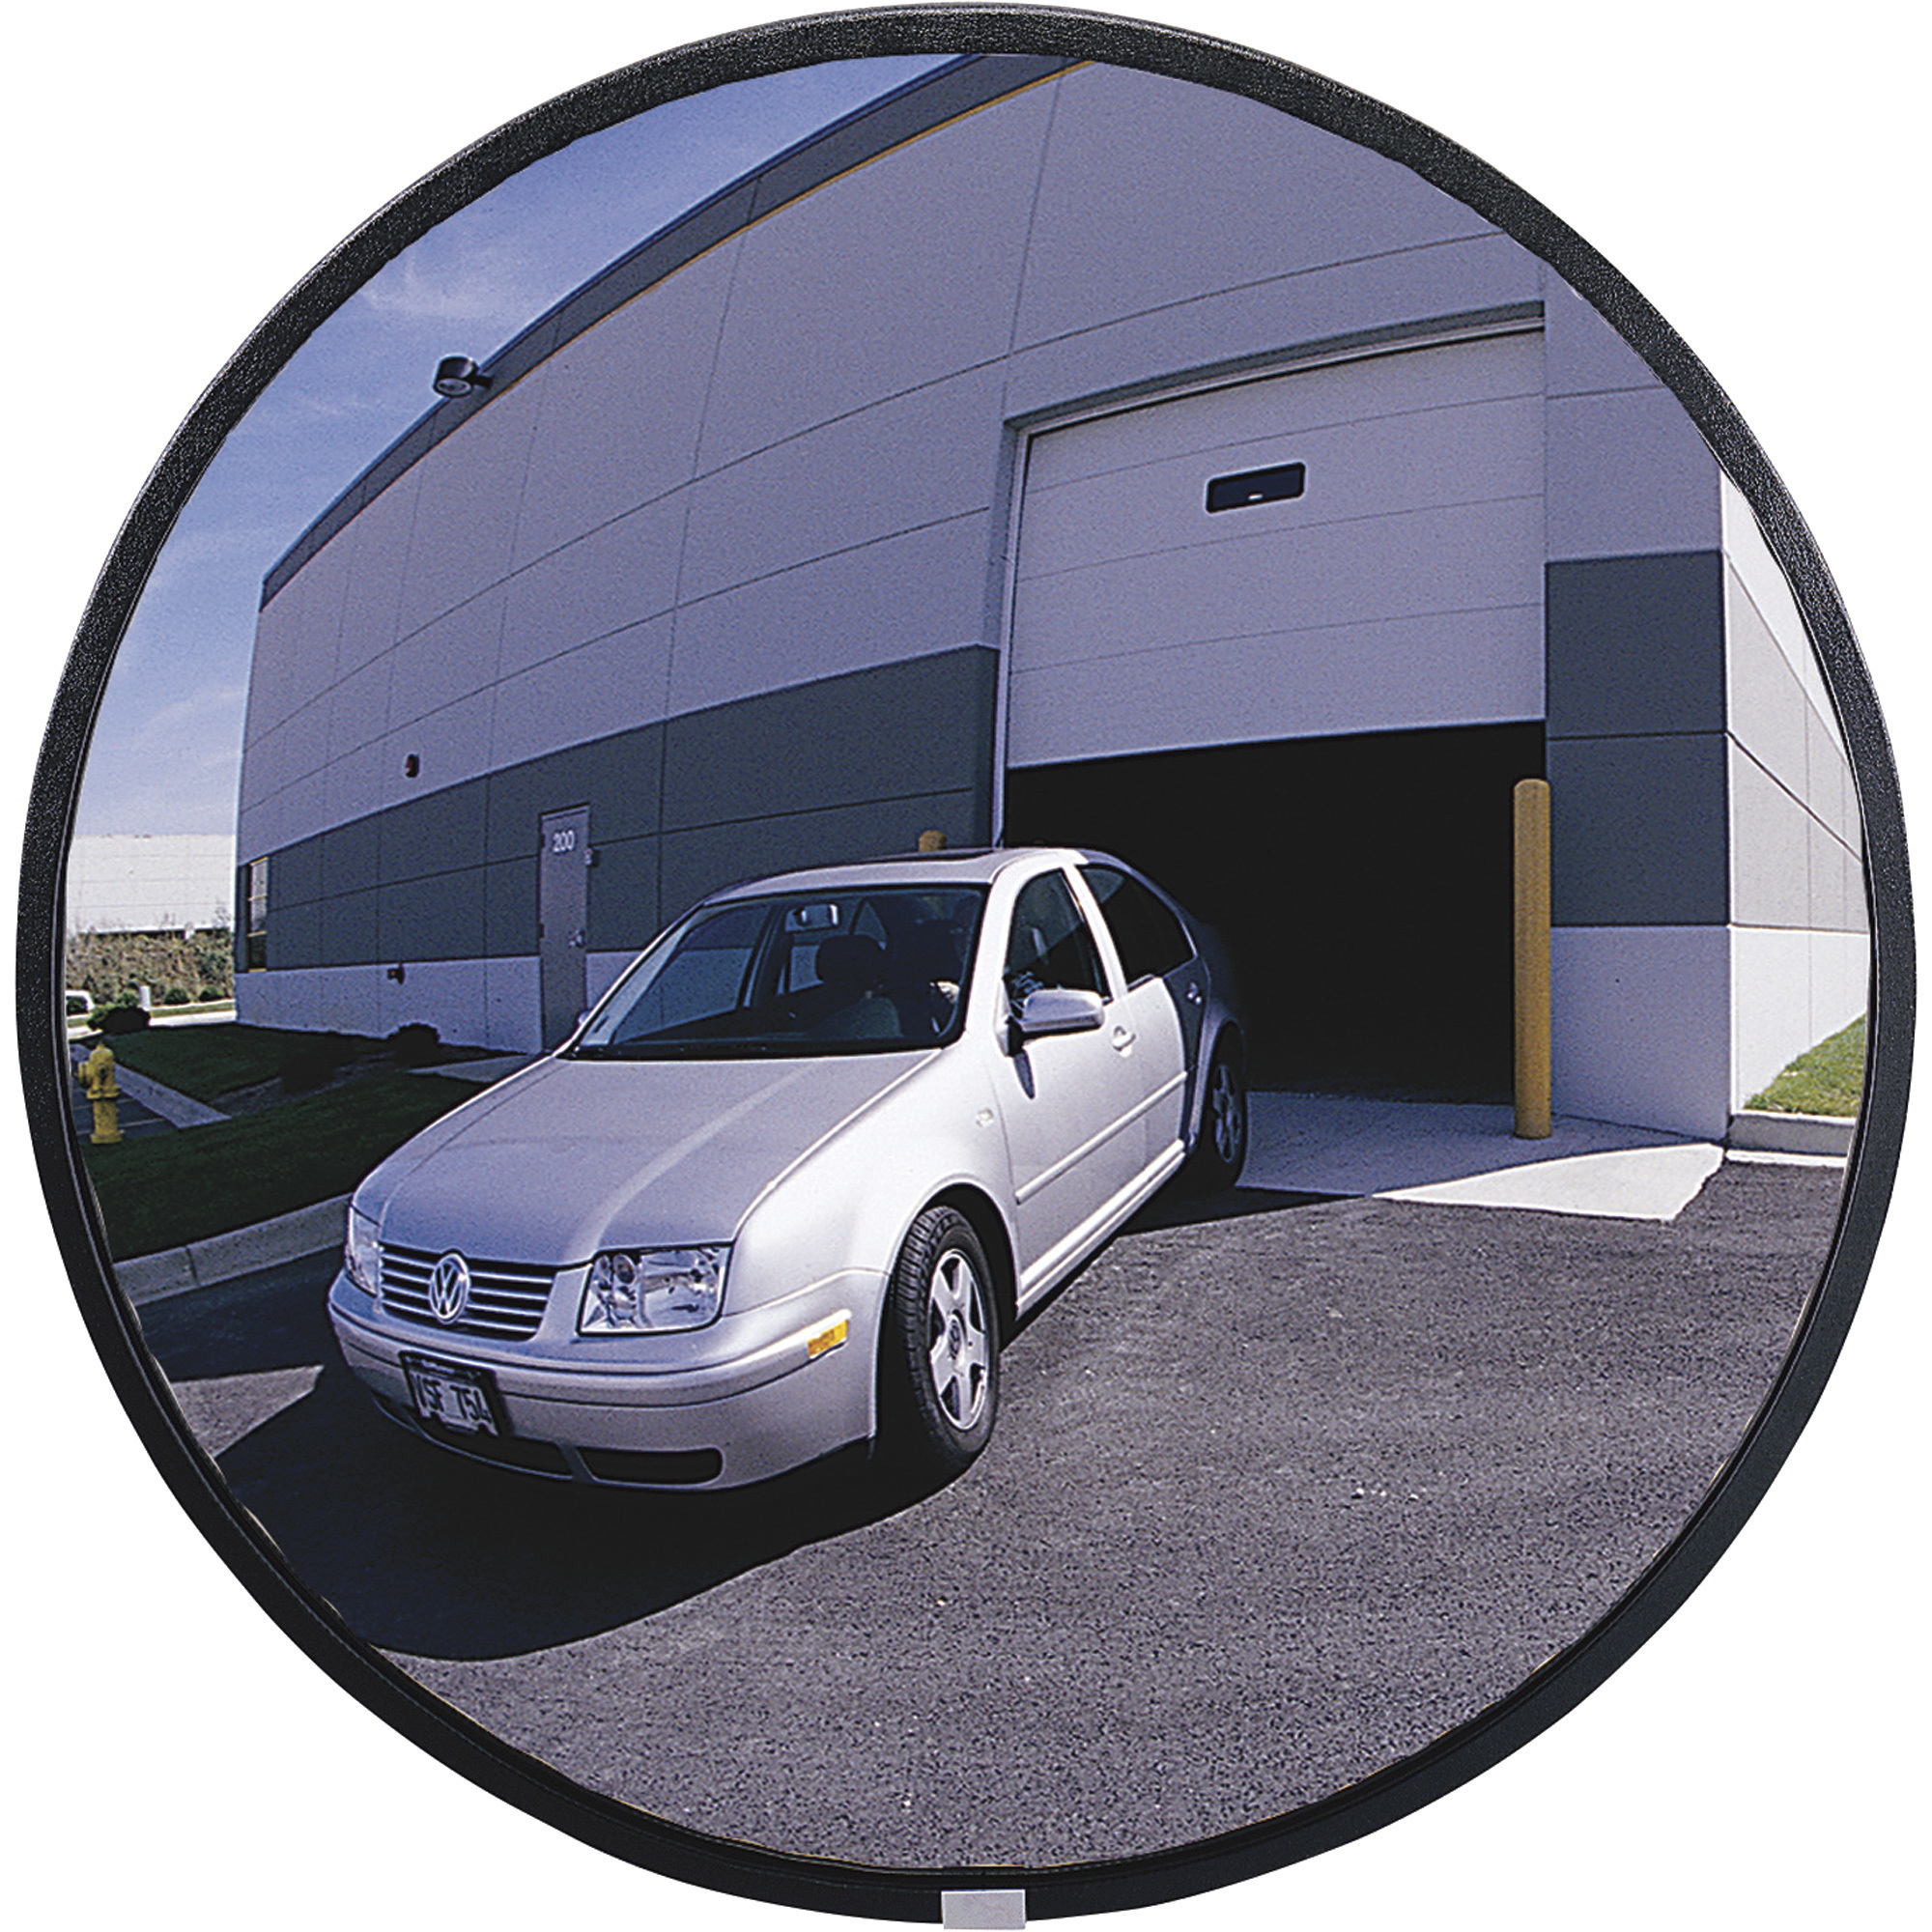 See All Outdoor Convex Safety Mirror â 18Inch Diameter, Acrylic, 20-Ft. View, Model PLX018